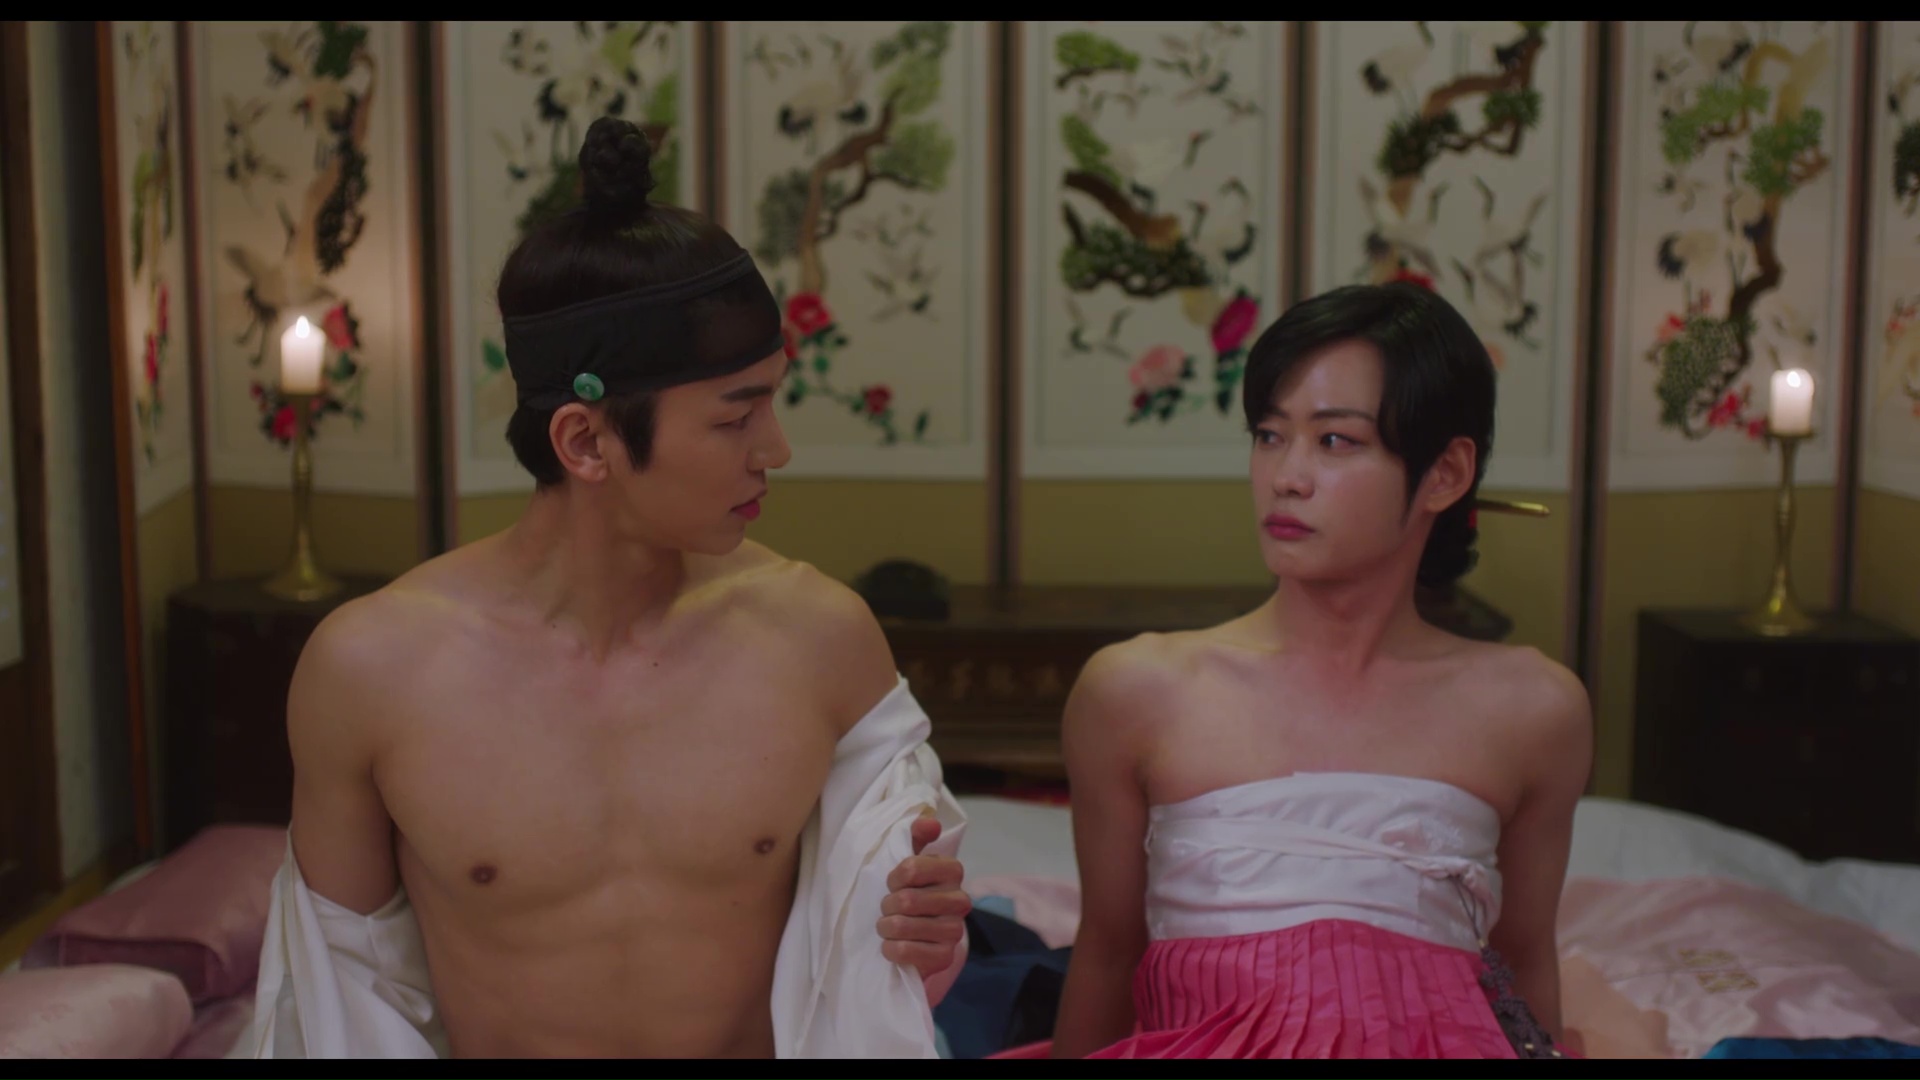 Good Ol’ Review: Charming Cast Helps Make Up for Untapped Potential in Cute, Fluffy “Nobleman Ryu’s Wedding”